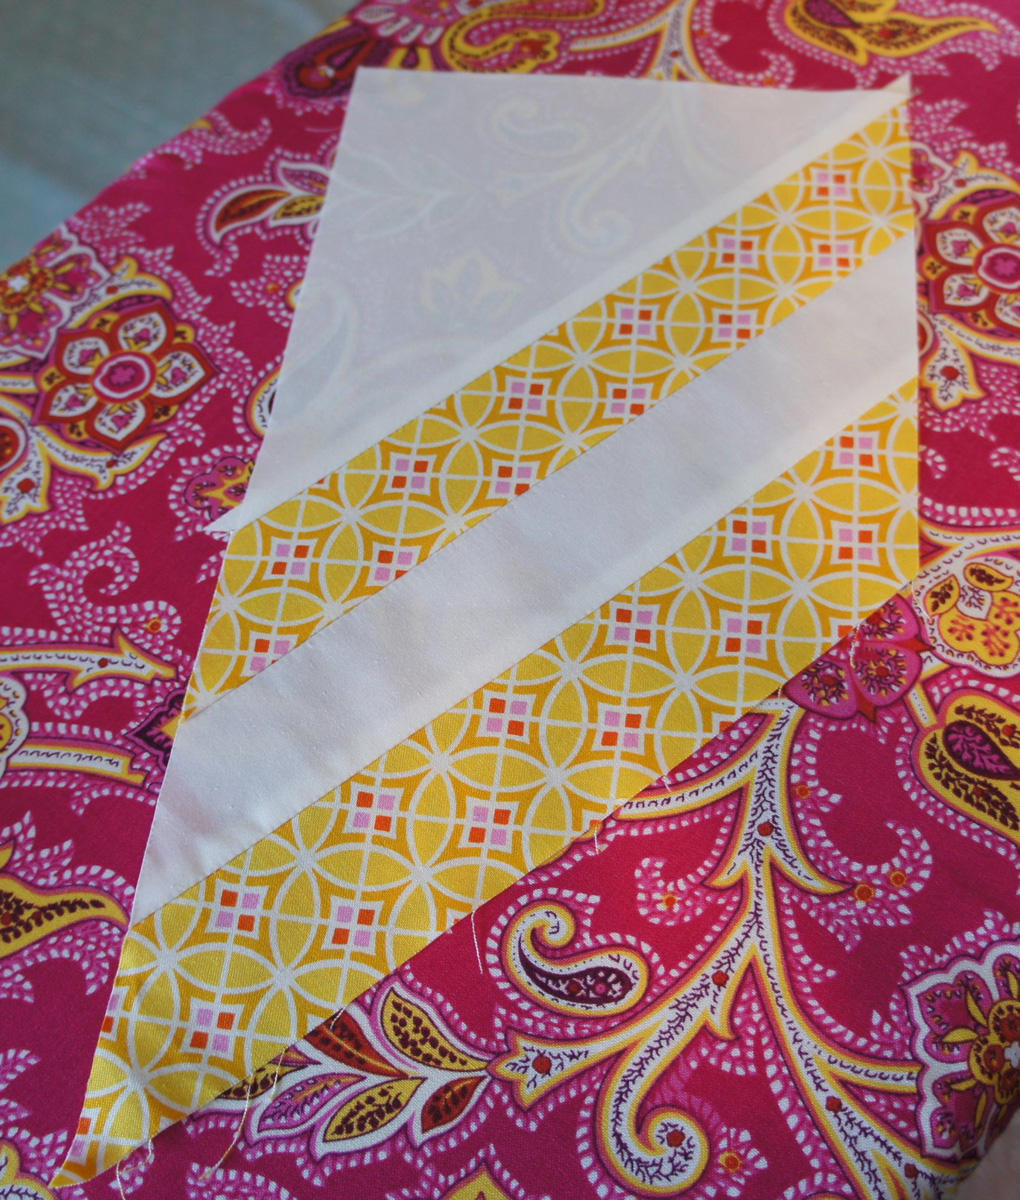 A Zig and A Zag Second Sewing Instructions